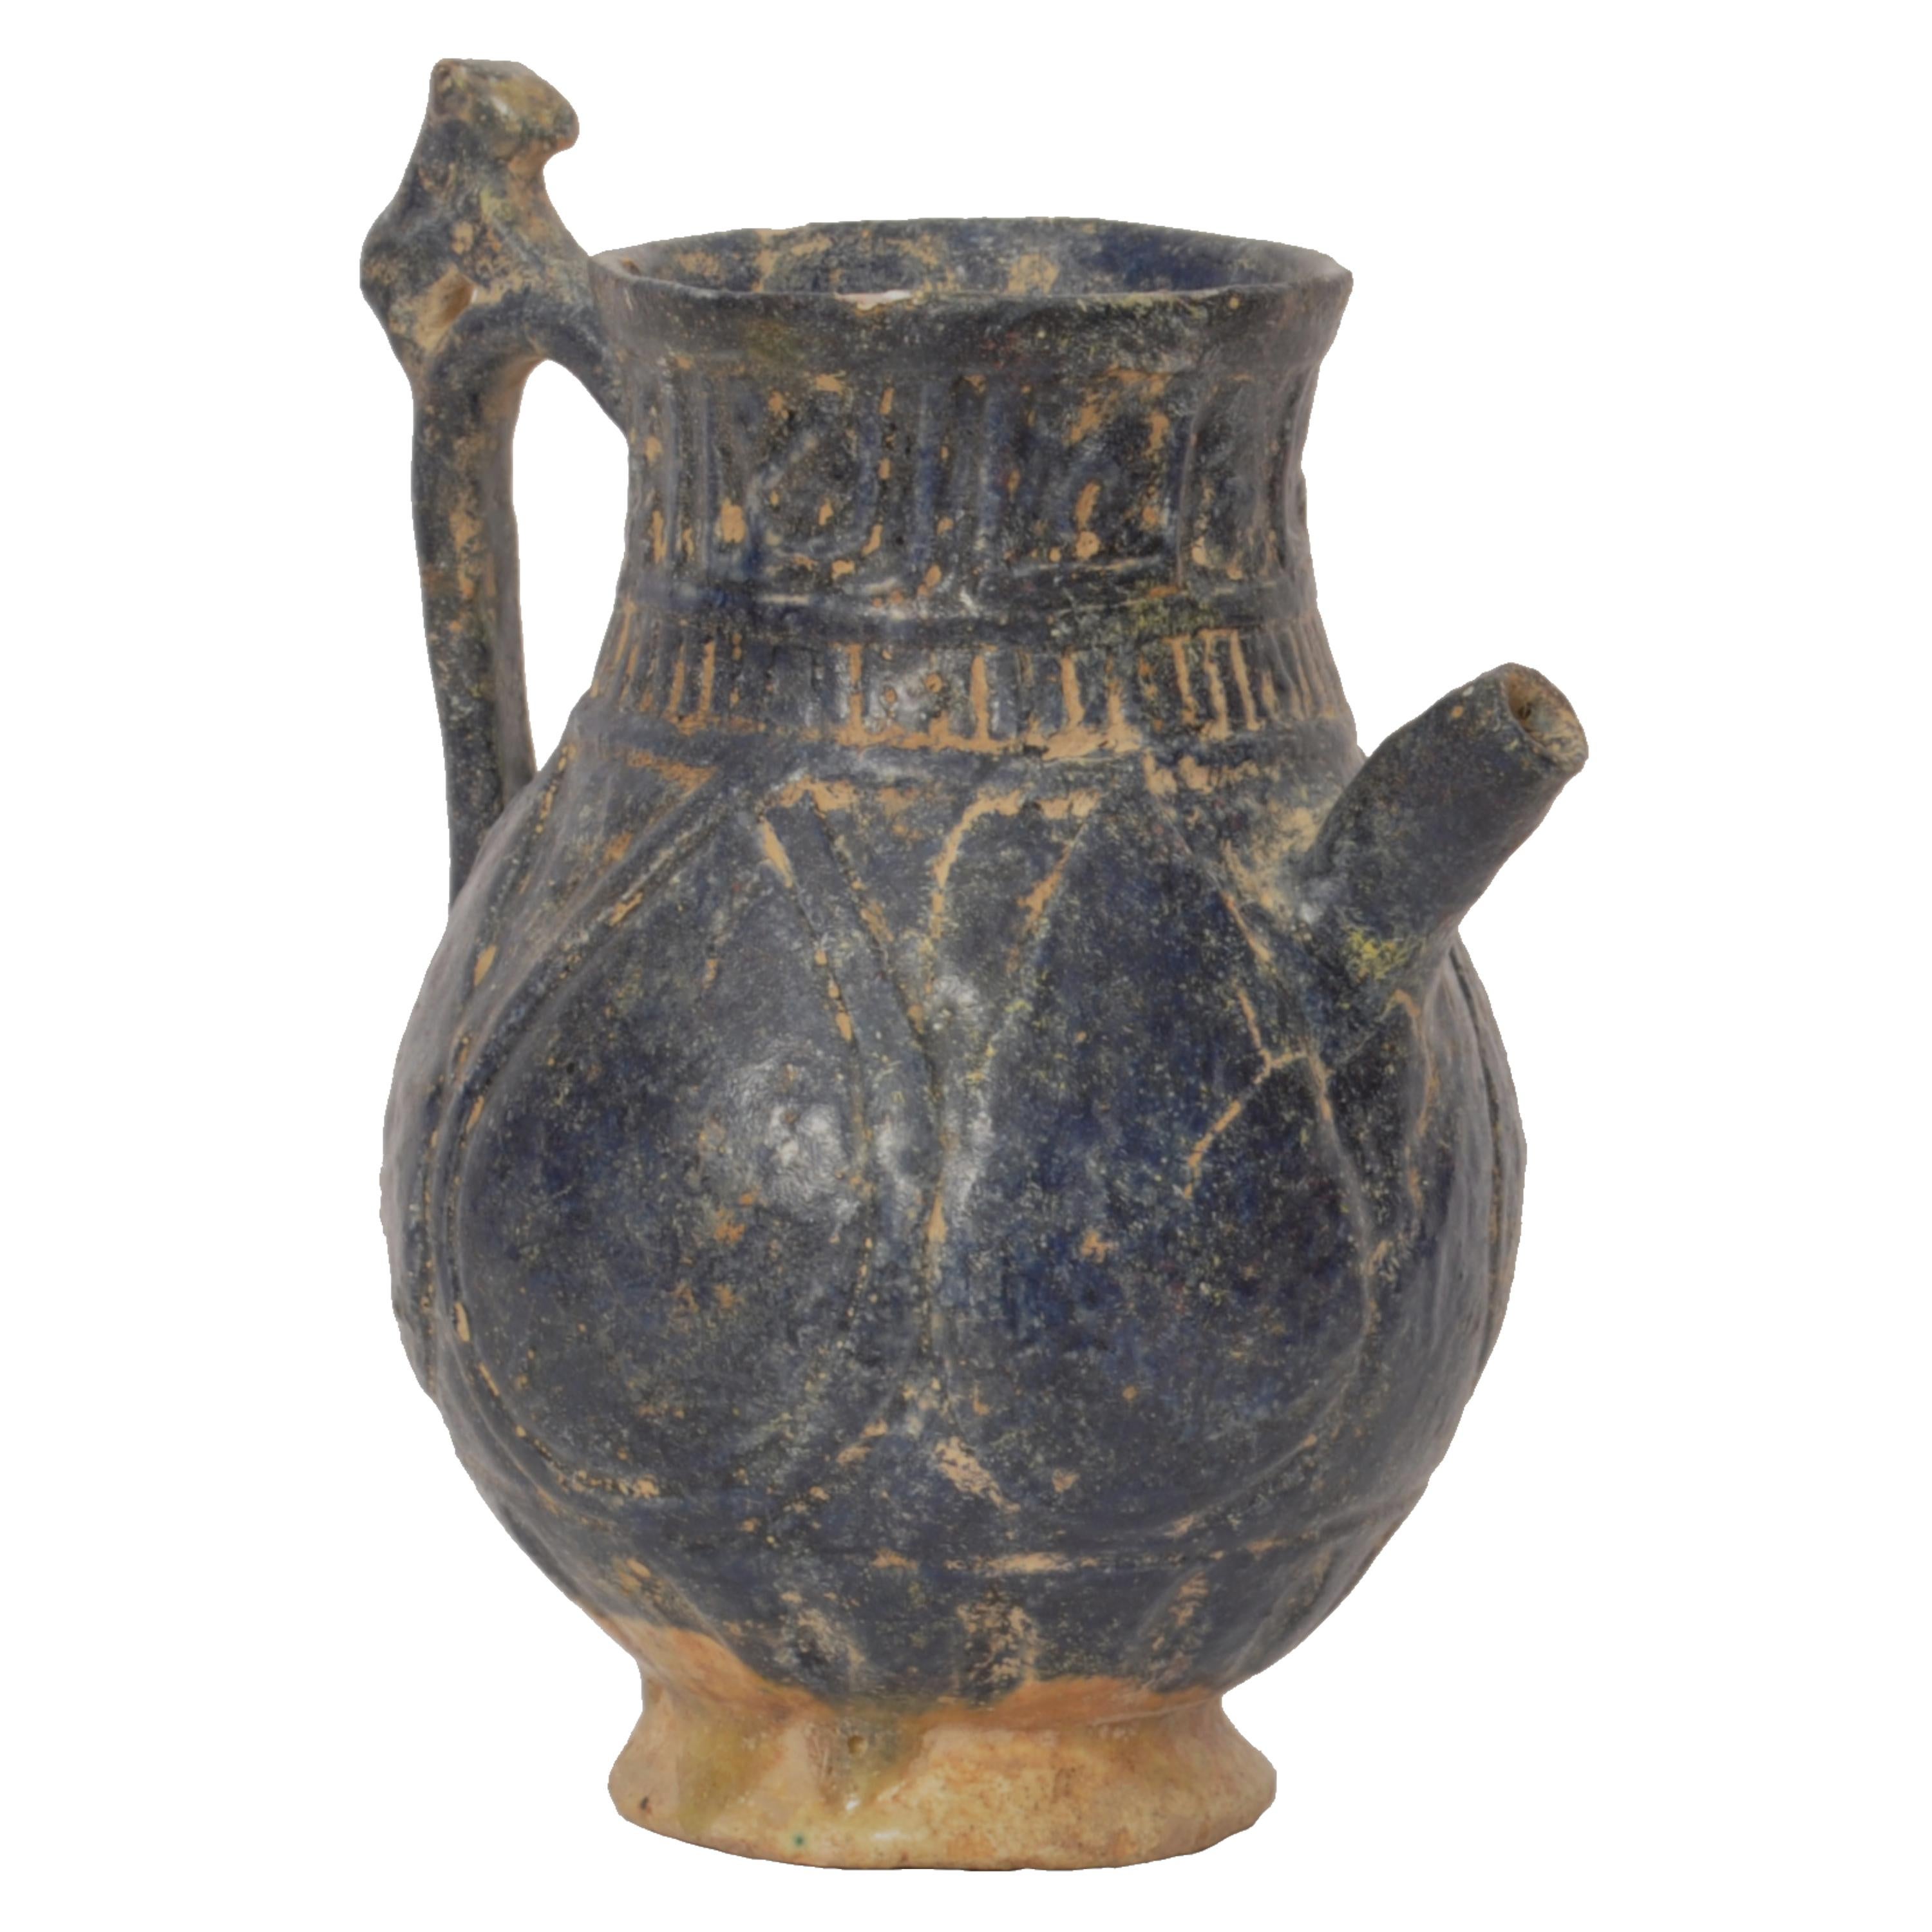 Ancient Persian Islamic Blue Glazed Pottery Vessel Jug Caligraphy Khorasan 1200 In Good Condition For Sale In Portland, OR